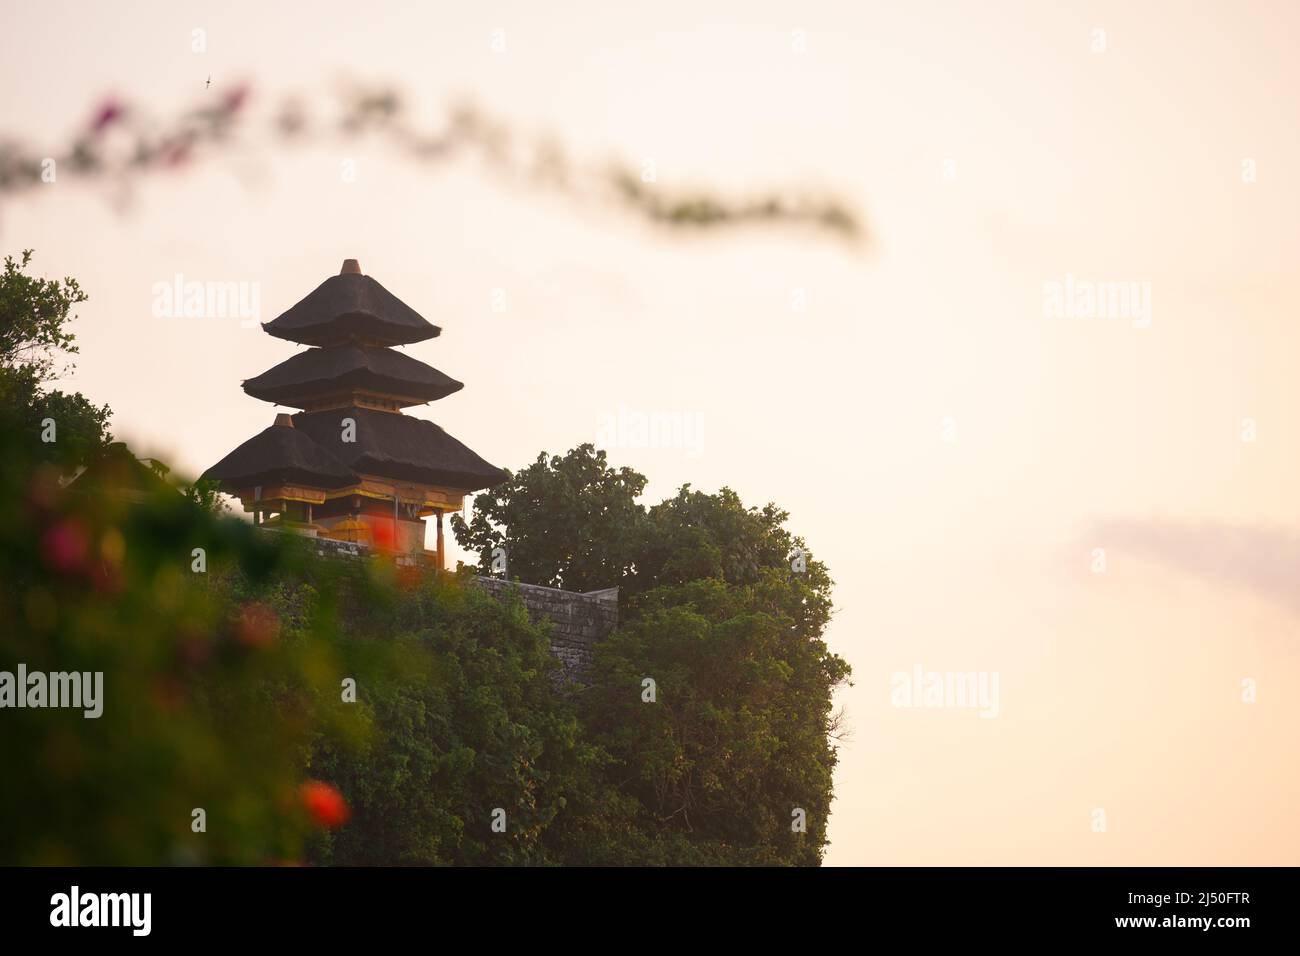 Balinese Temple on the Cliff against the warm sky Stock Photo